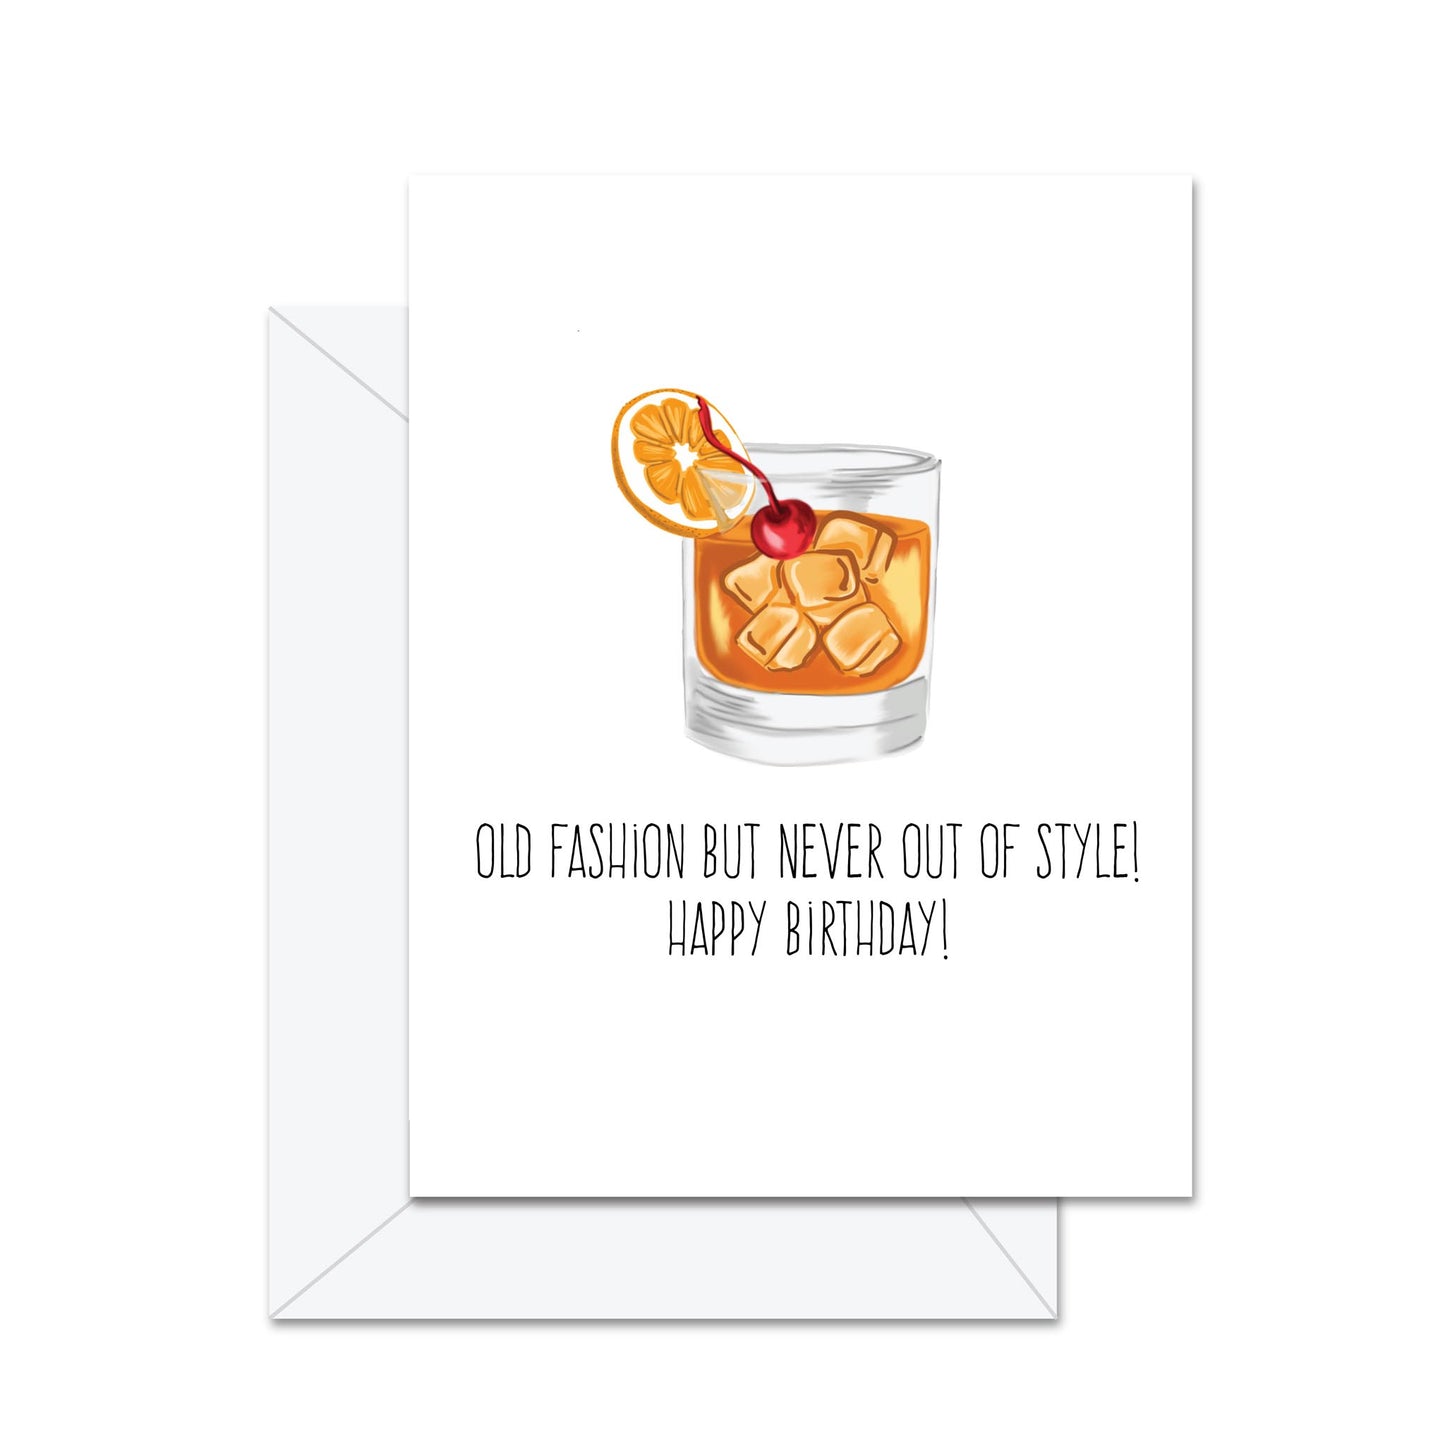 Old Fashion But Never Out Of Style! Happy Birthday! - Greeting Card